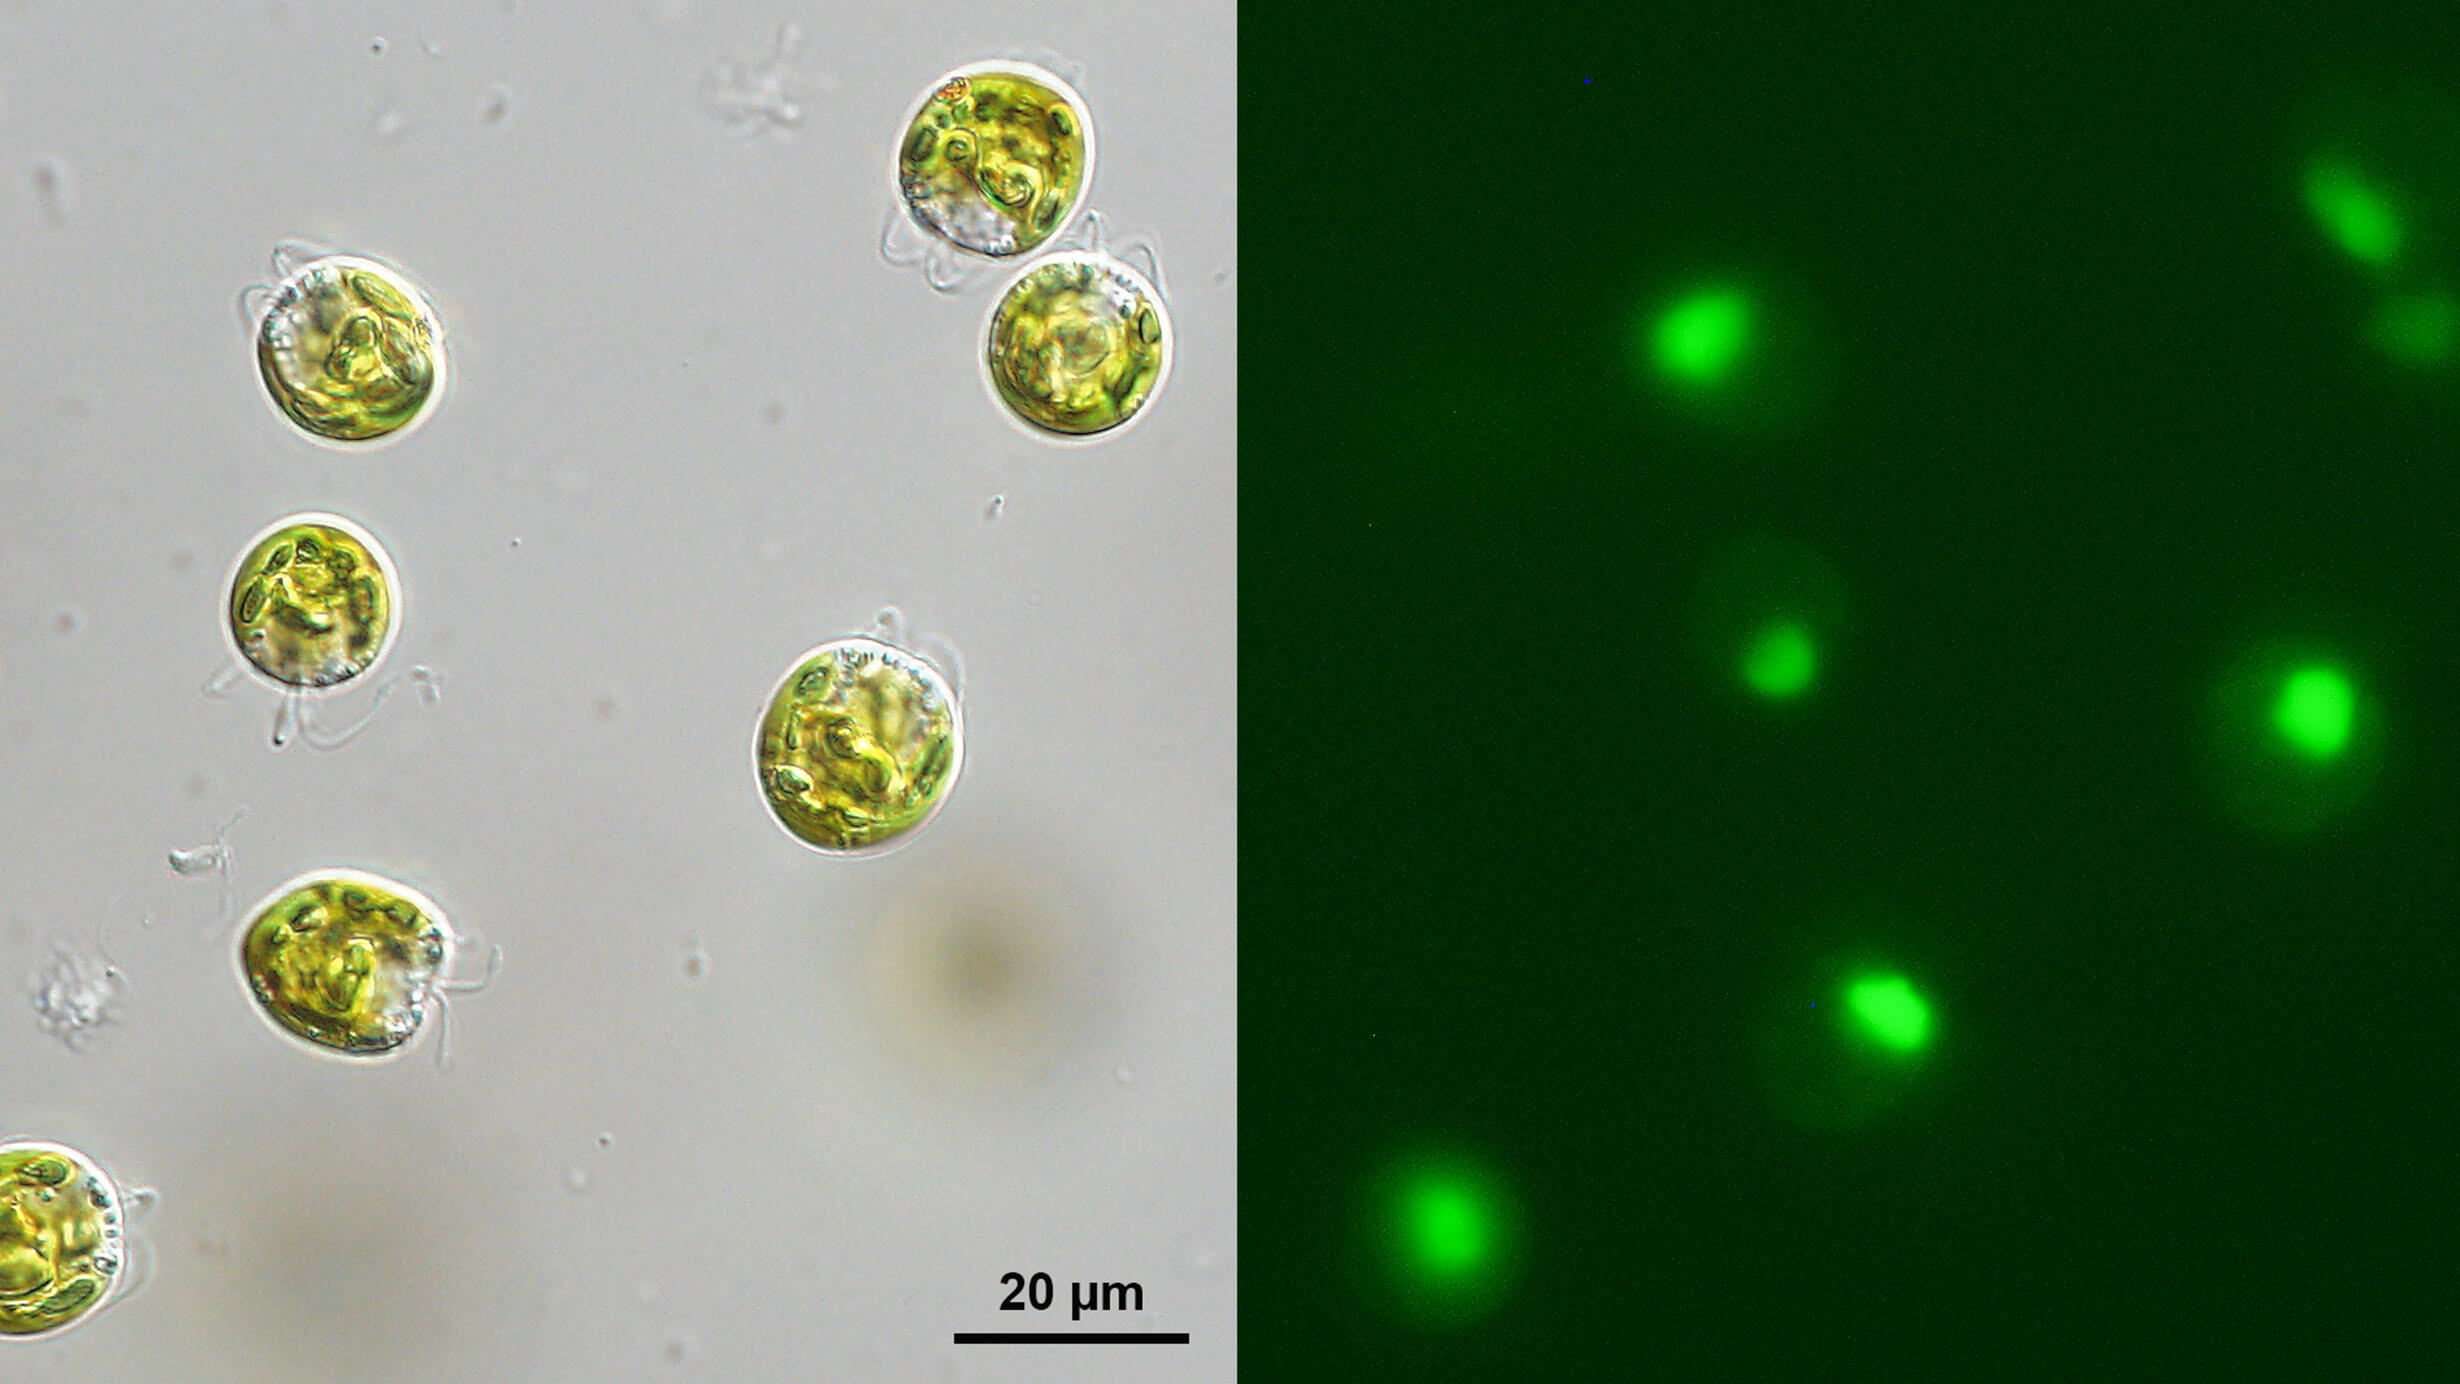 Pyramimonas parkeae algae (left) glow green (right) after bacteria ingestion.